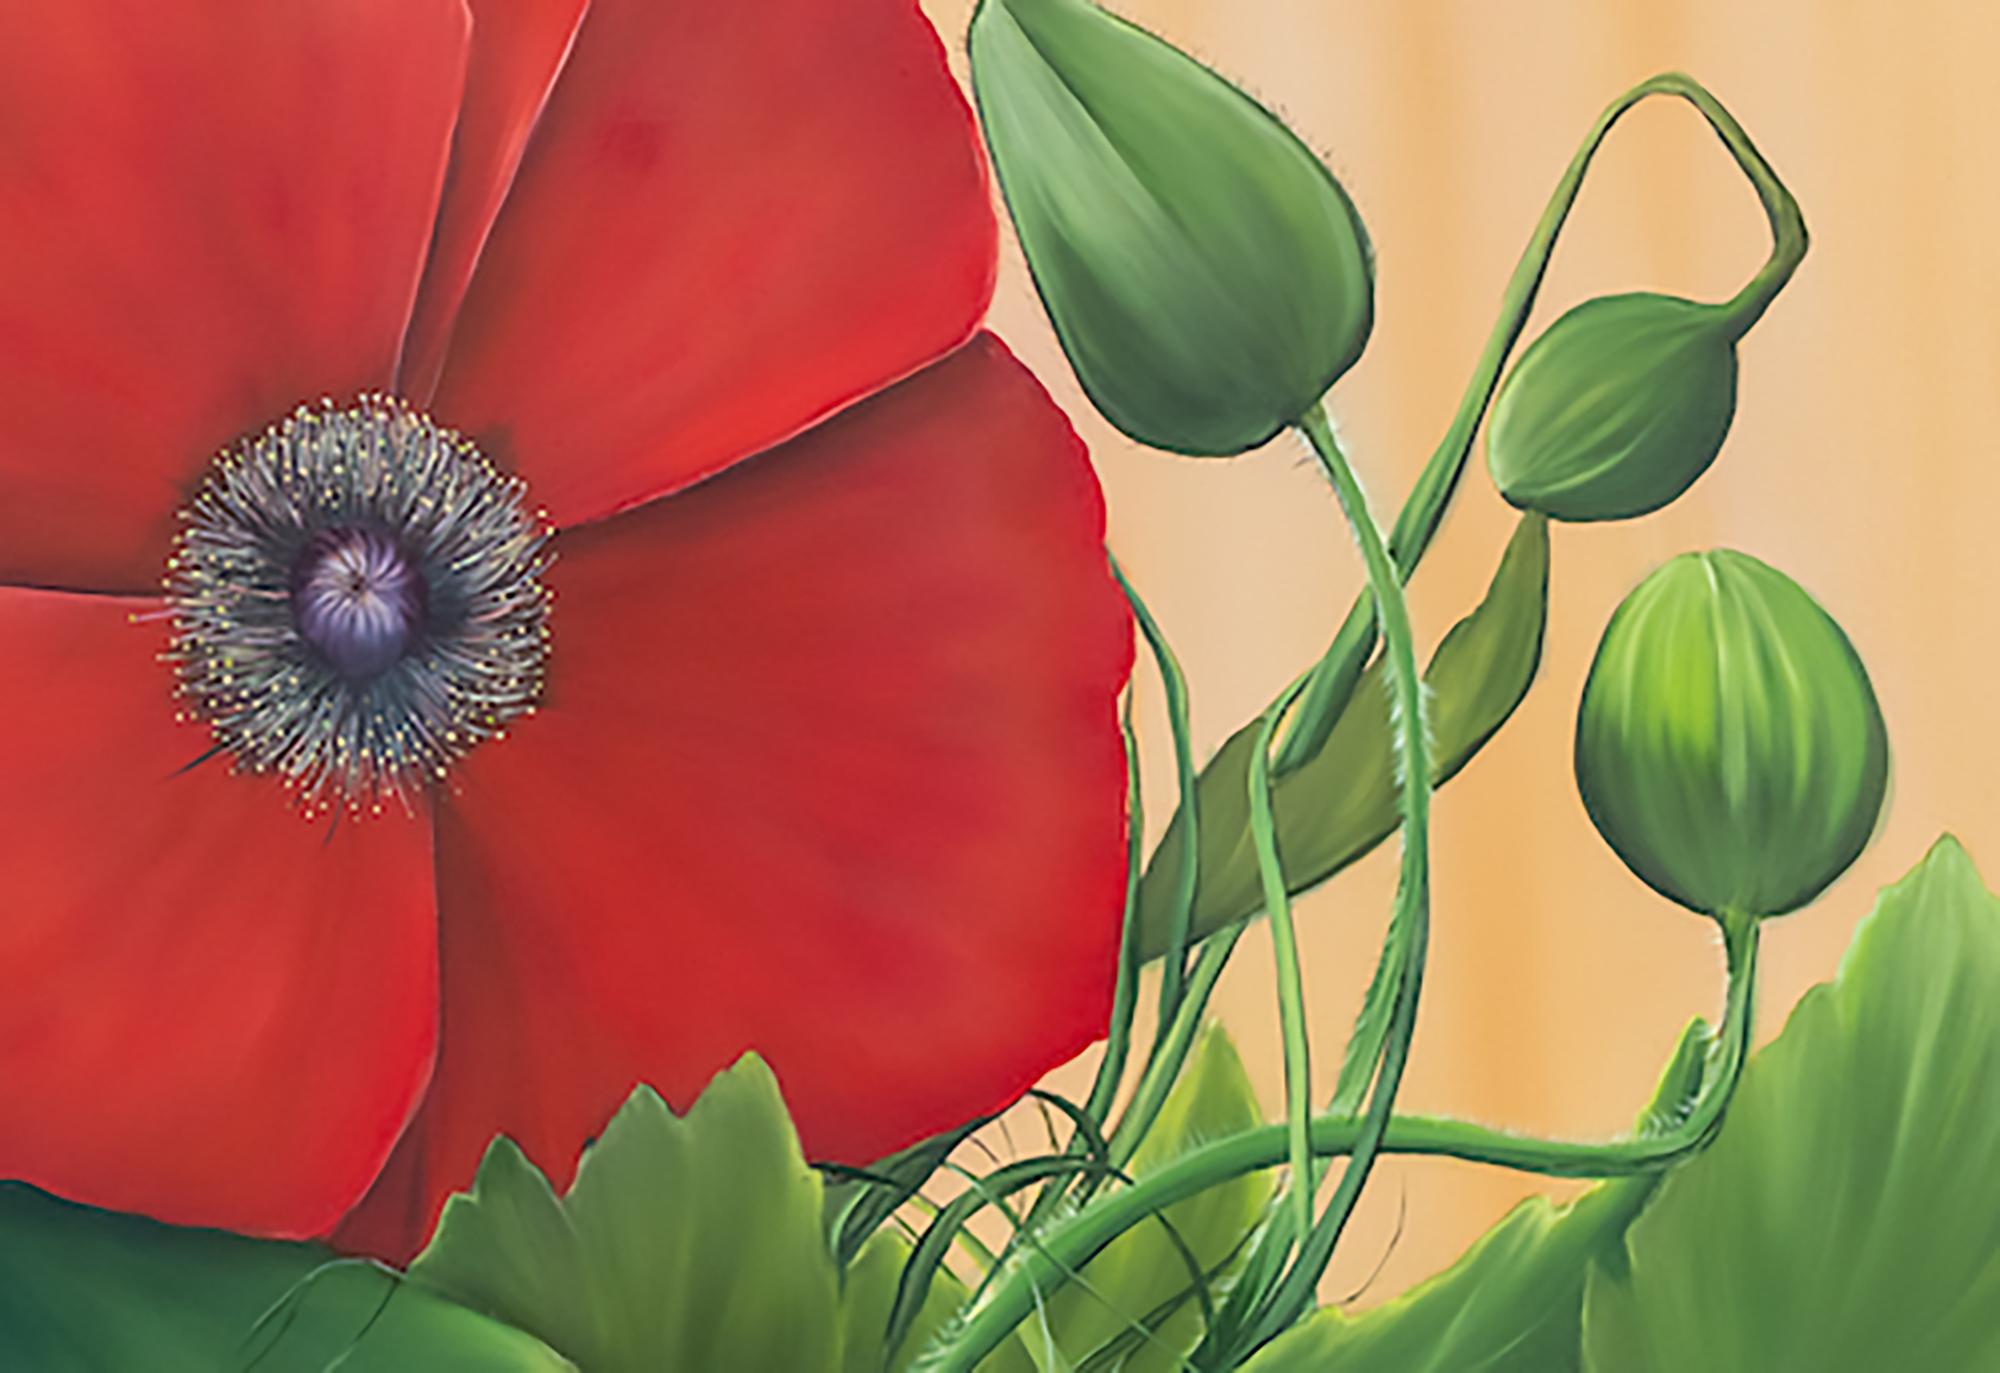 Corn Poppies, botanical, red and green - Contemporary Painting by Allison Green